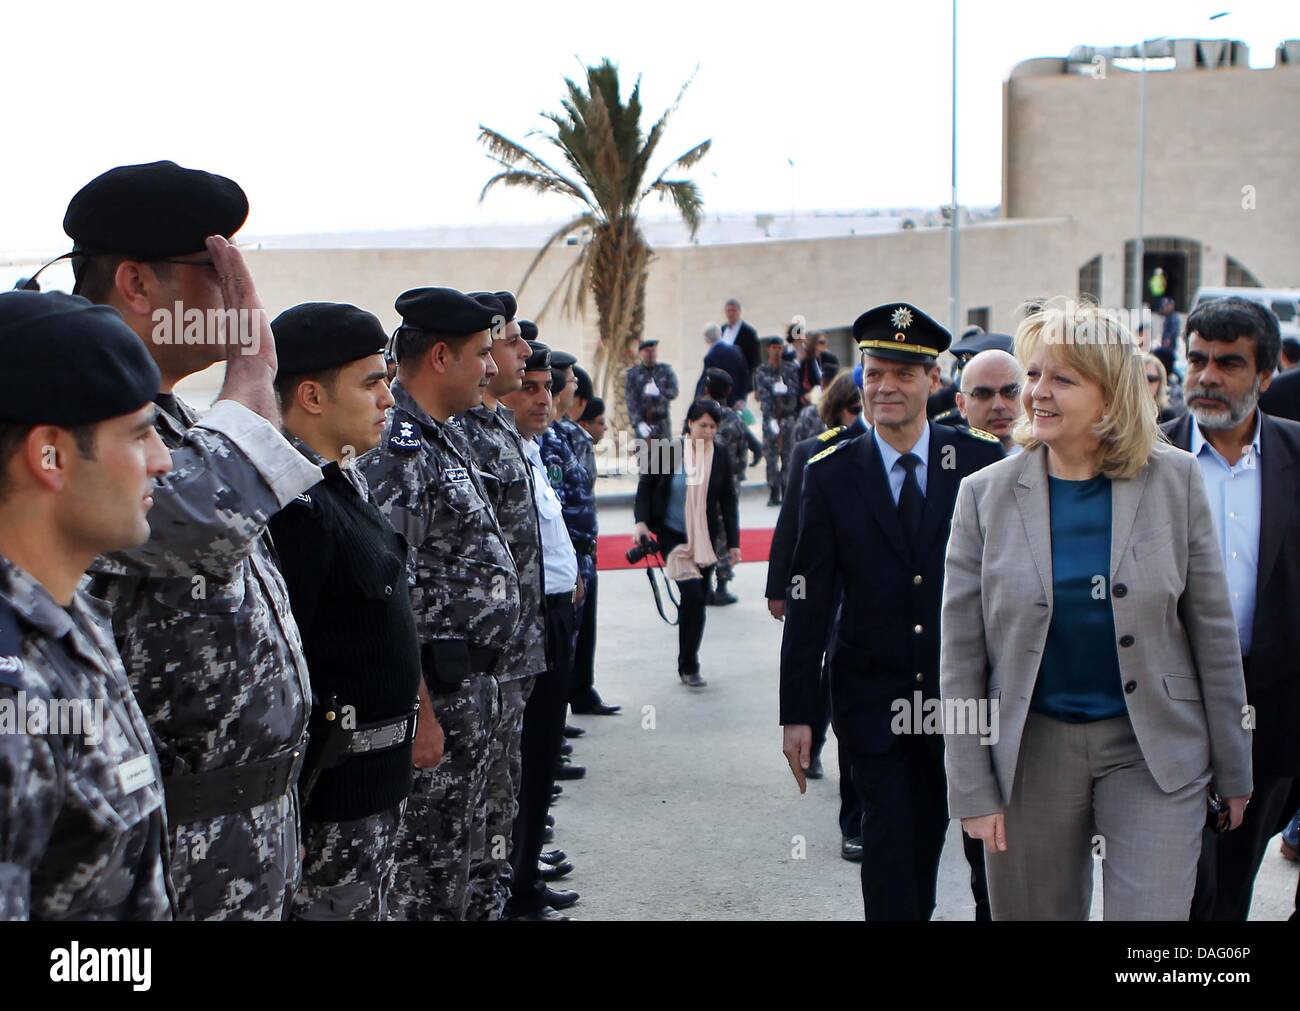 Federal state North Rhine Westfalia's Prime Minister Hannelore Kraft (R) visits Jericho, Israel, 08 March 2011. In her function as President of the German Council, Mrs Kraft is on a five-day visit to Israel and the Palestinian territories. Photo: OLIVER BERG Stock Photo